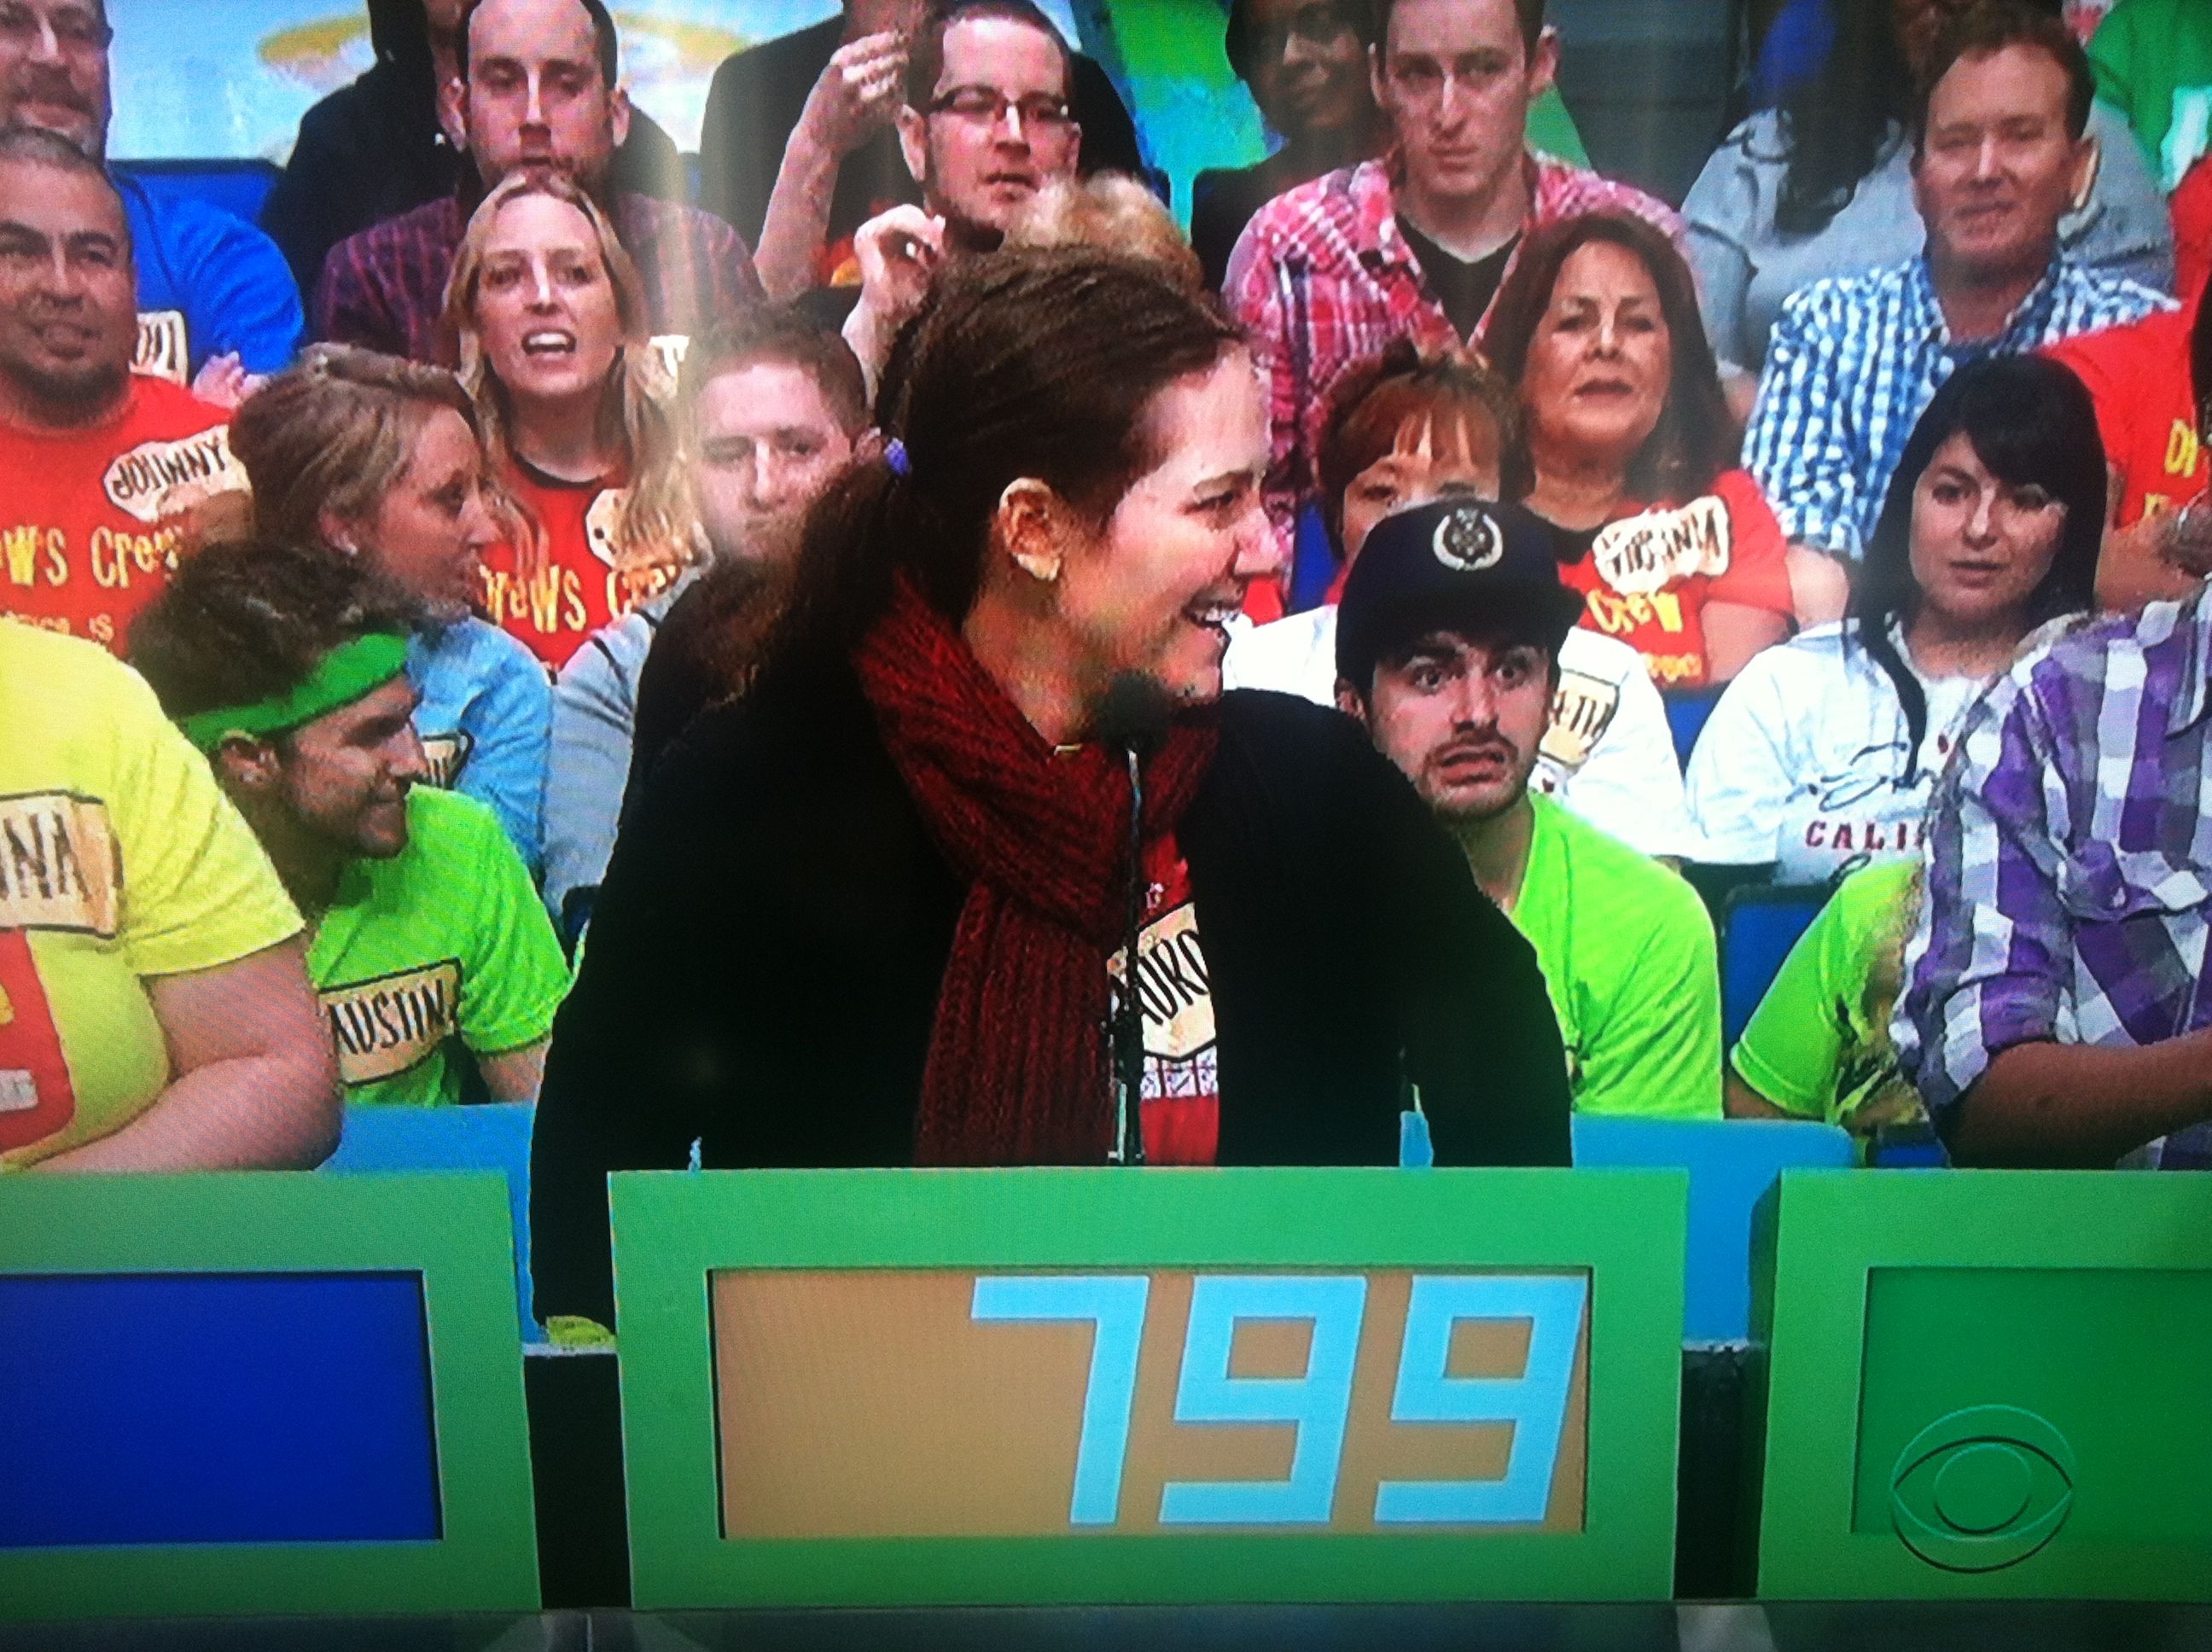 Aurora De Lucia bids 799 in contestant's row on The Price is Right, and the guy behind her judges that bid.